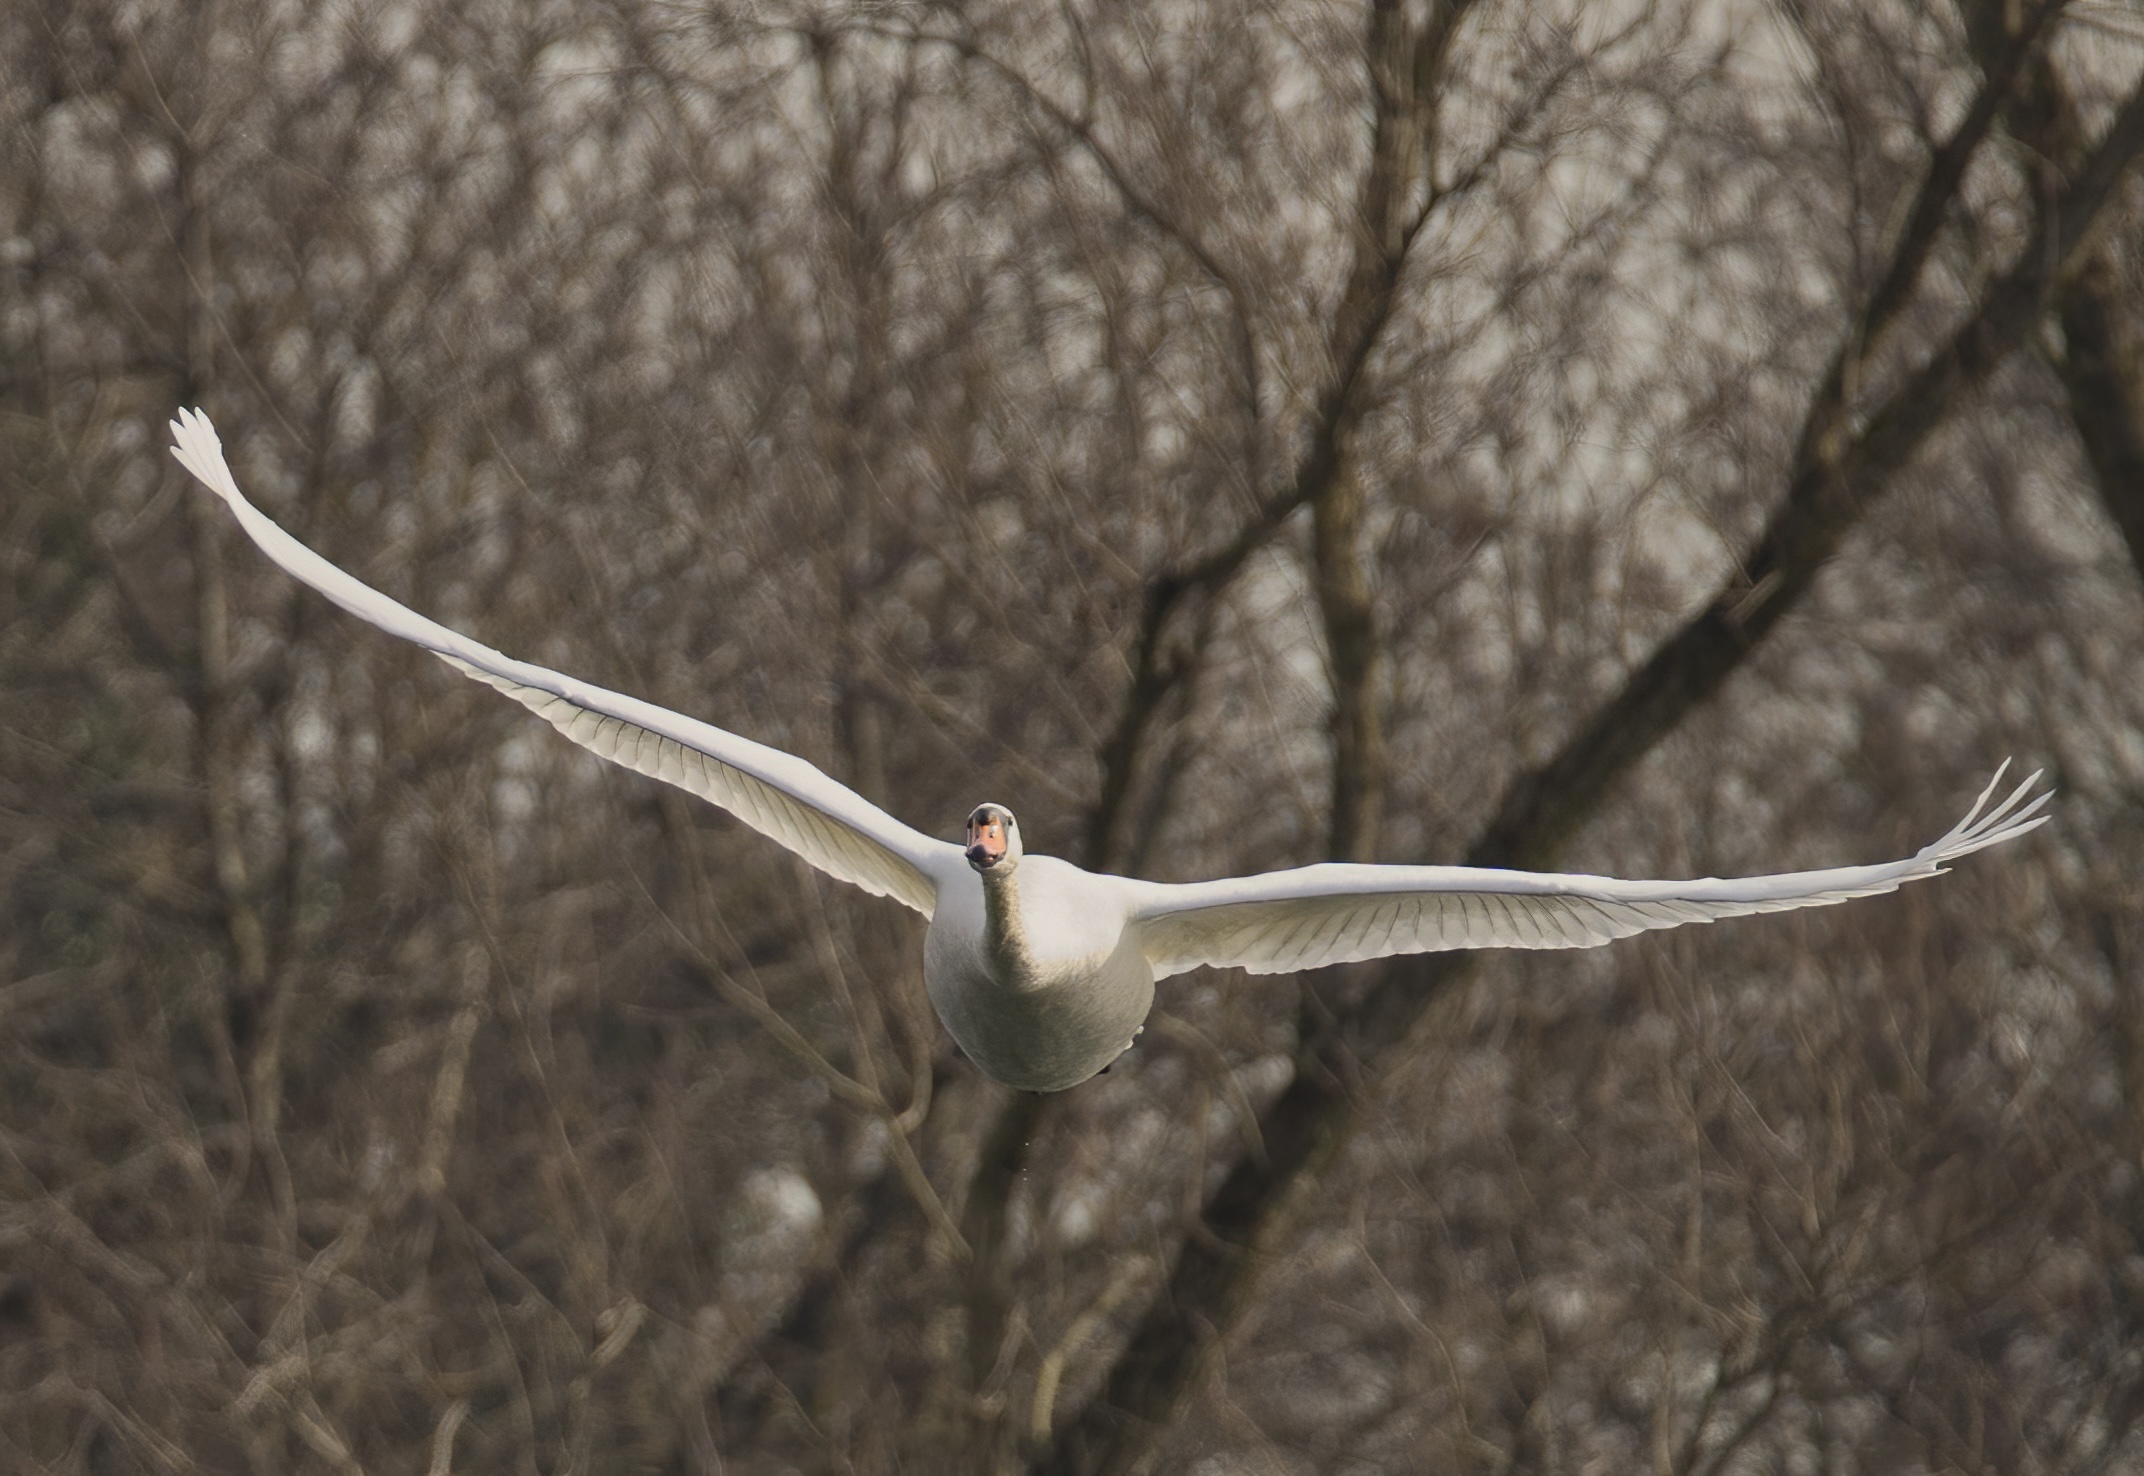 The frontal flight of the swan...